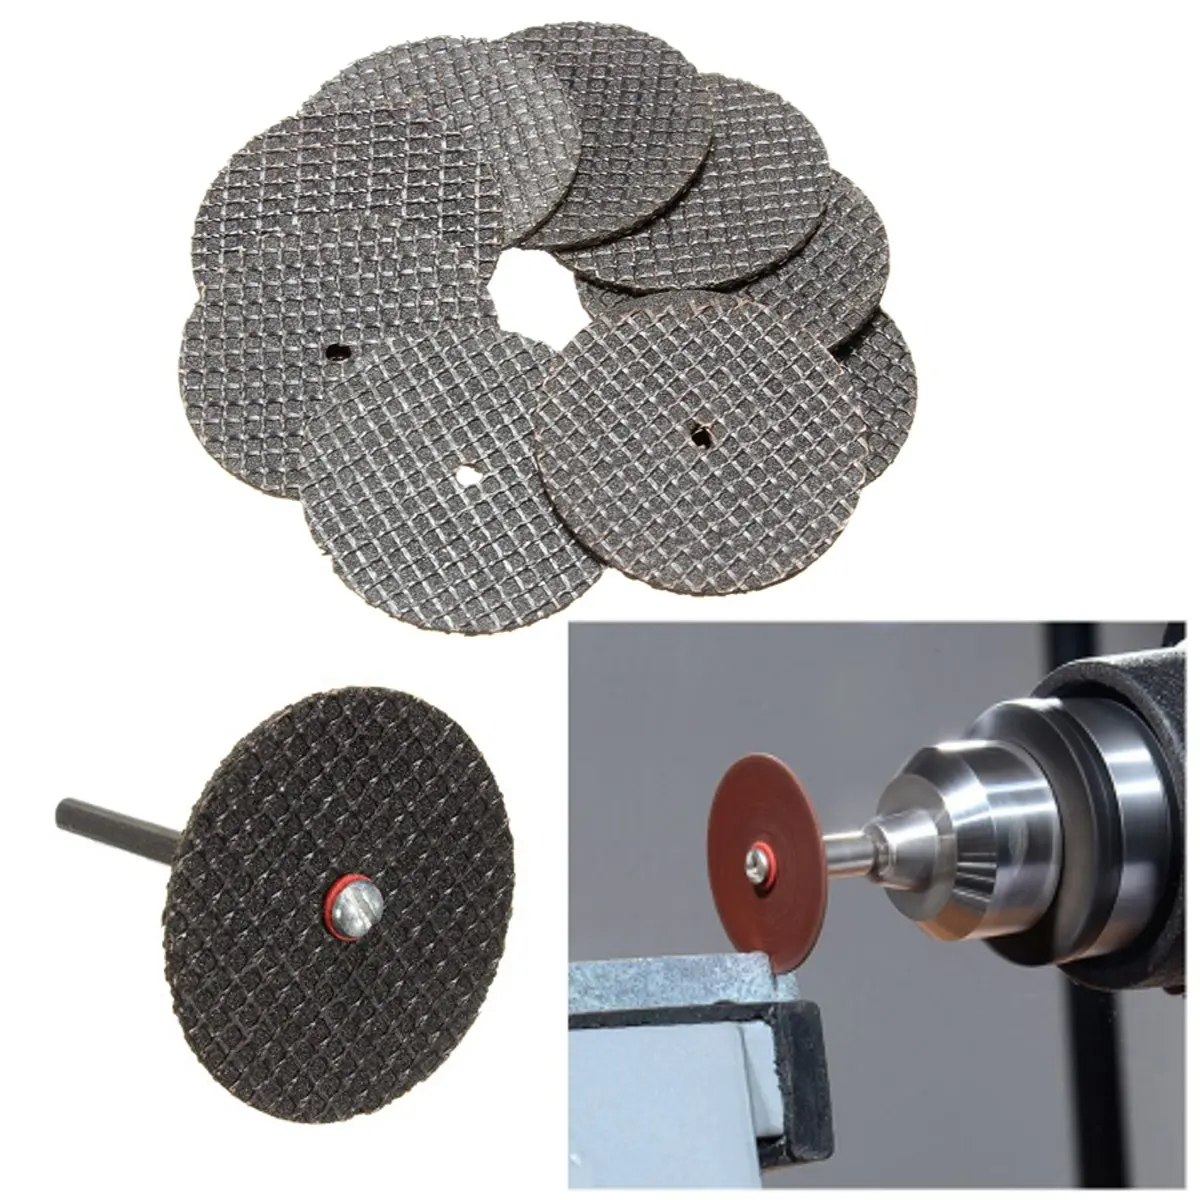 

25pcs/set Metal Cutting Disc for Dremel Grinder Rotary Tool Circular Saw Blade Wheel Cutting Sanding with 1pc Mandrel Accessory